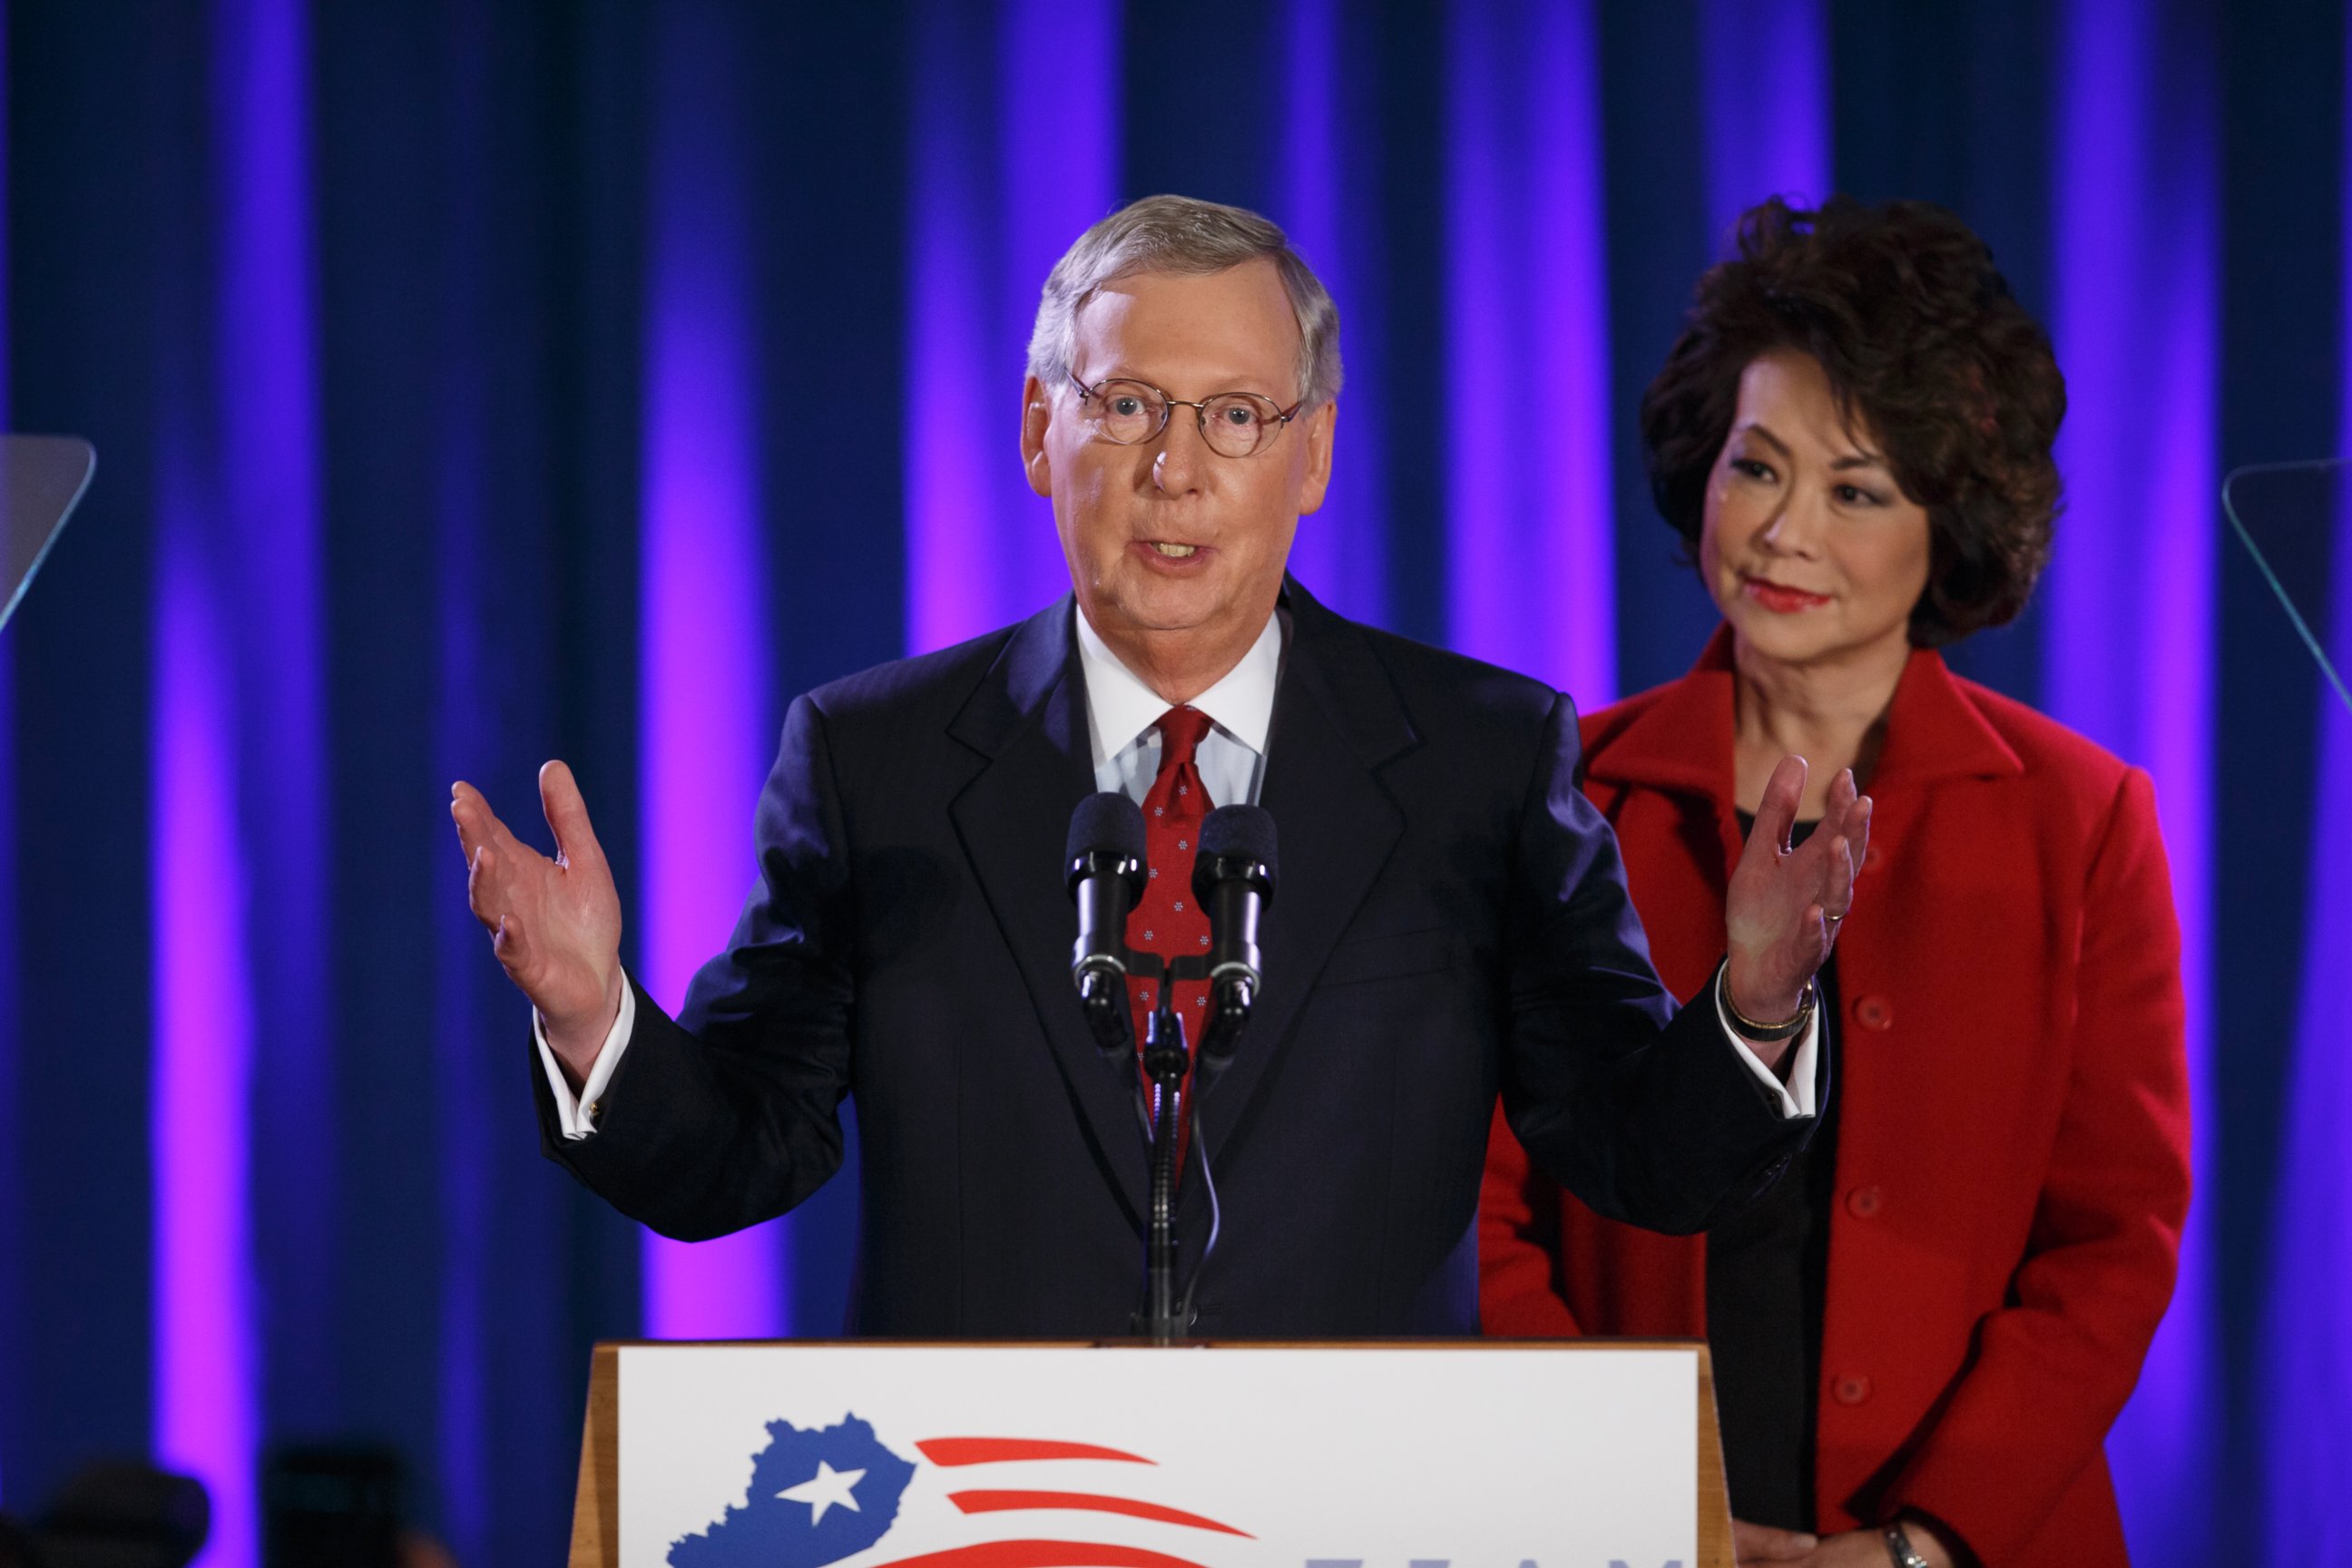 PHOTO: Senate Minority Leader Mitch McConnell of Ky., joined by his wife, former Labor Secretary Elaine Chao, celebrates with his supporters at an election night party in Louisville, Ky., Nov. 4, 2014.